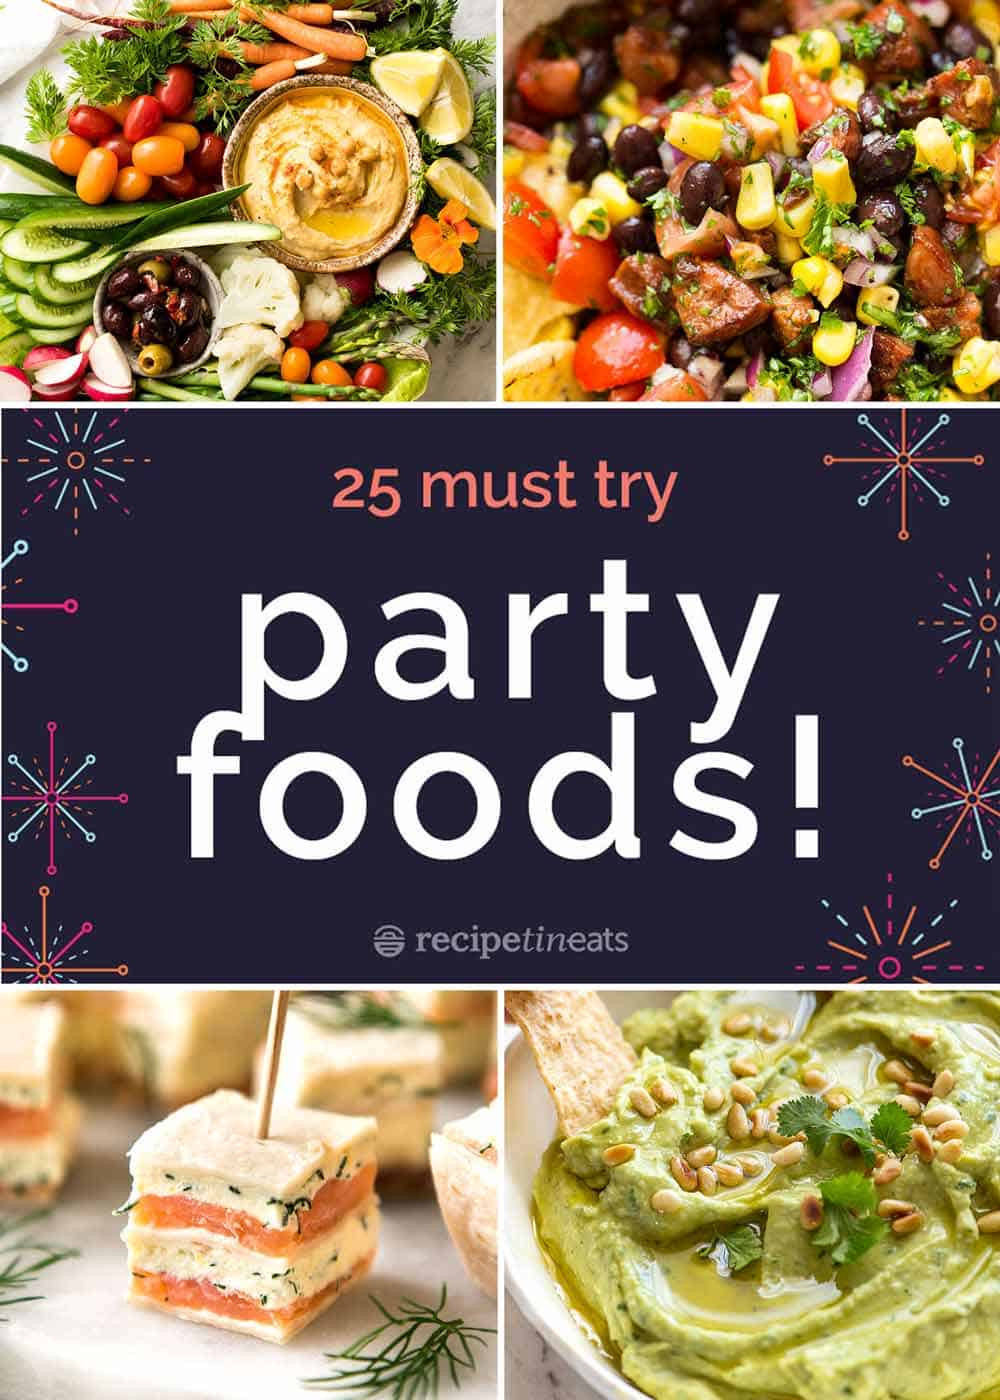 Party Snacks Recipes
 25 BEST Party Food Recipes